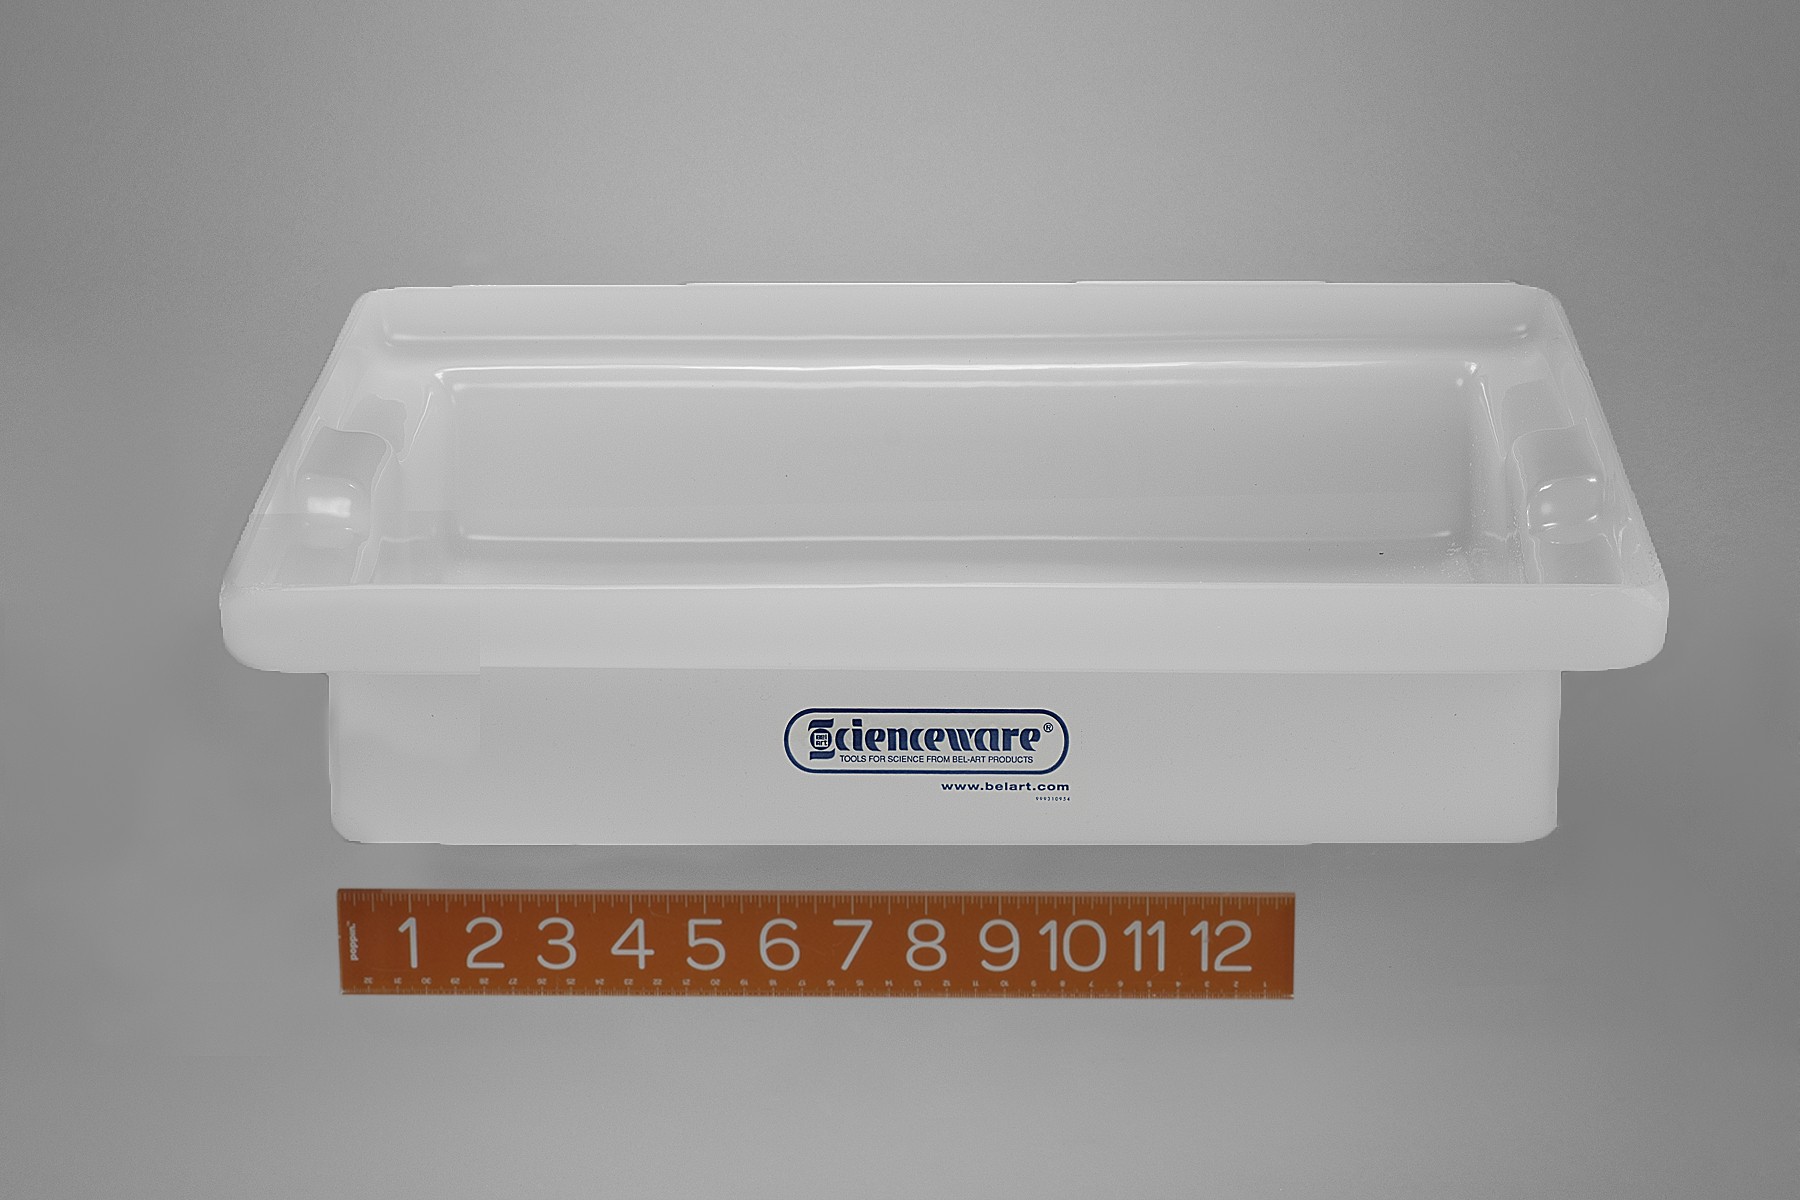 SP Bel-Art General Purpose Polyethylene Tray without Faucet; 12 x 16 x 3 in.